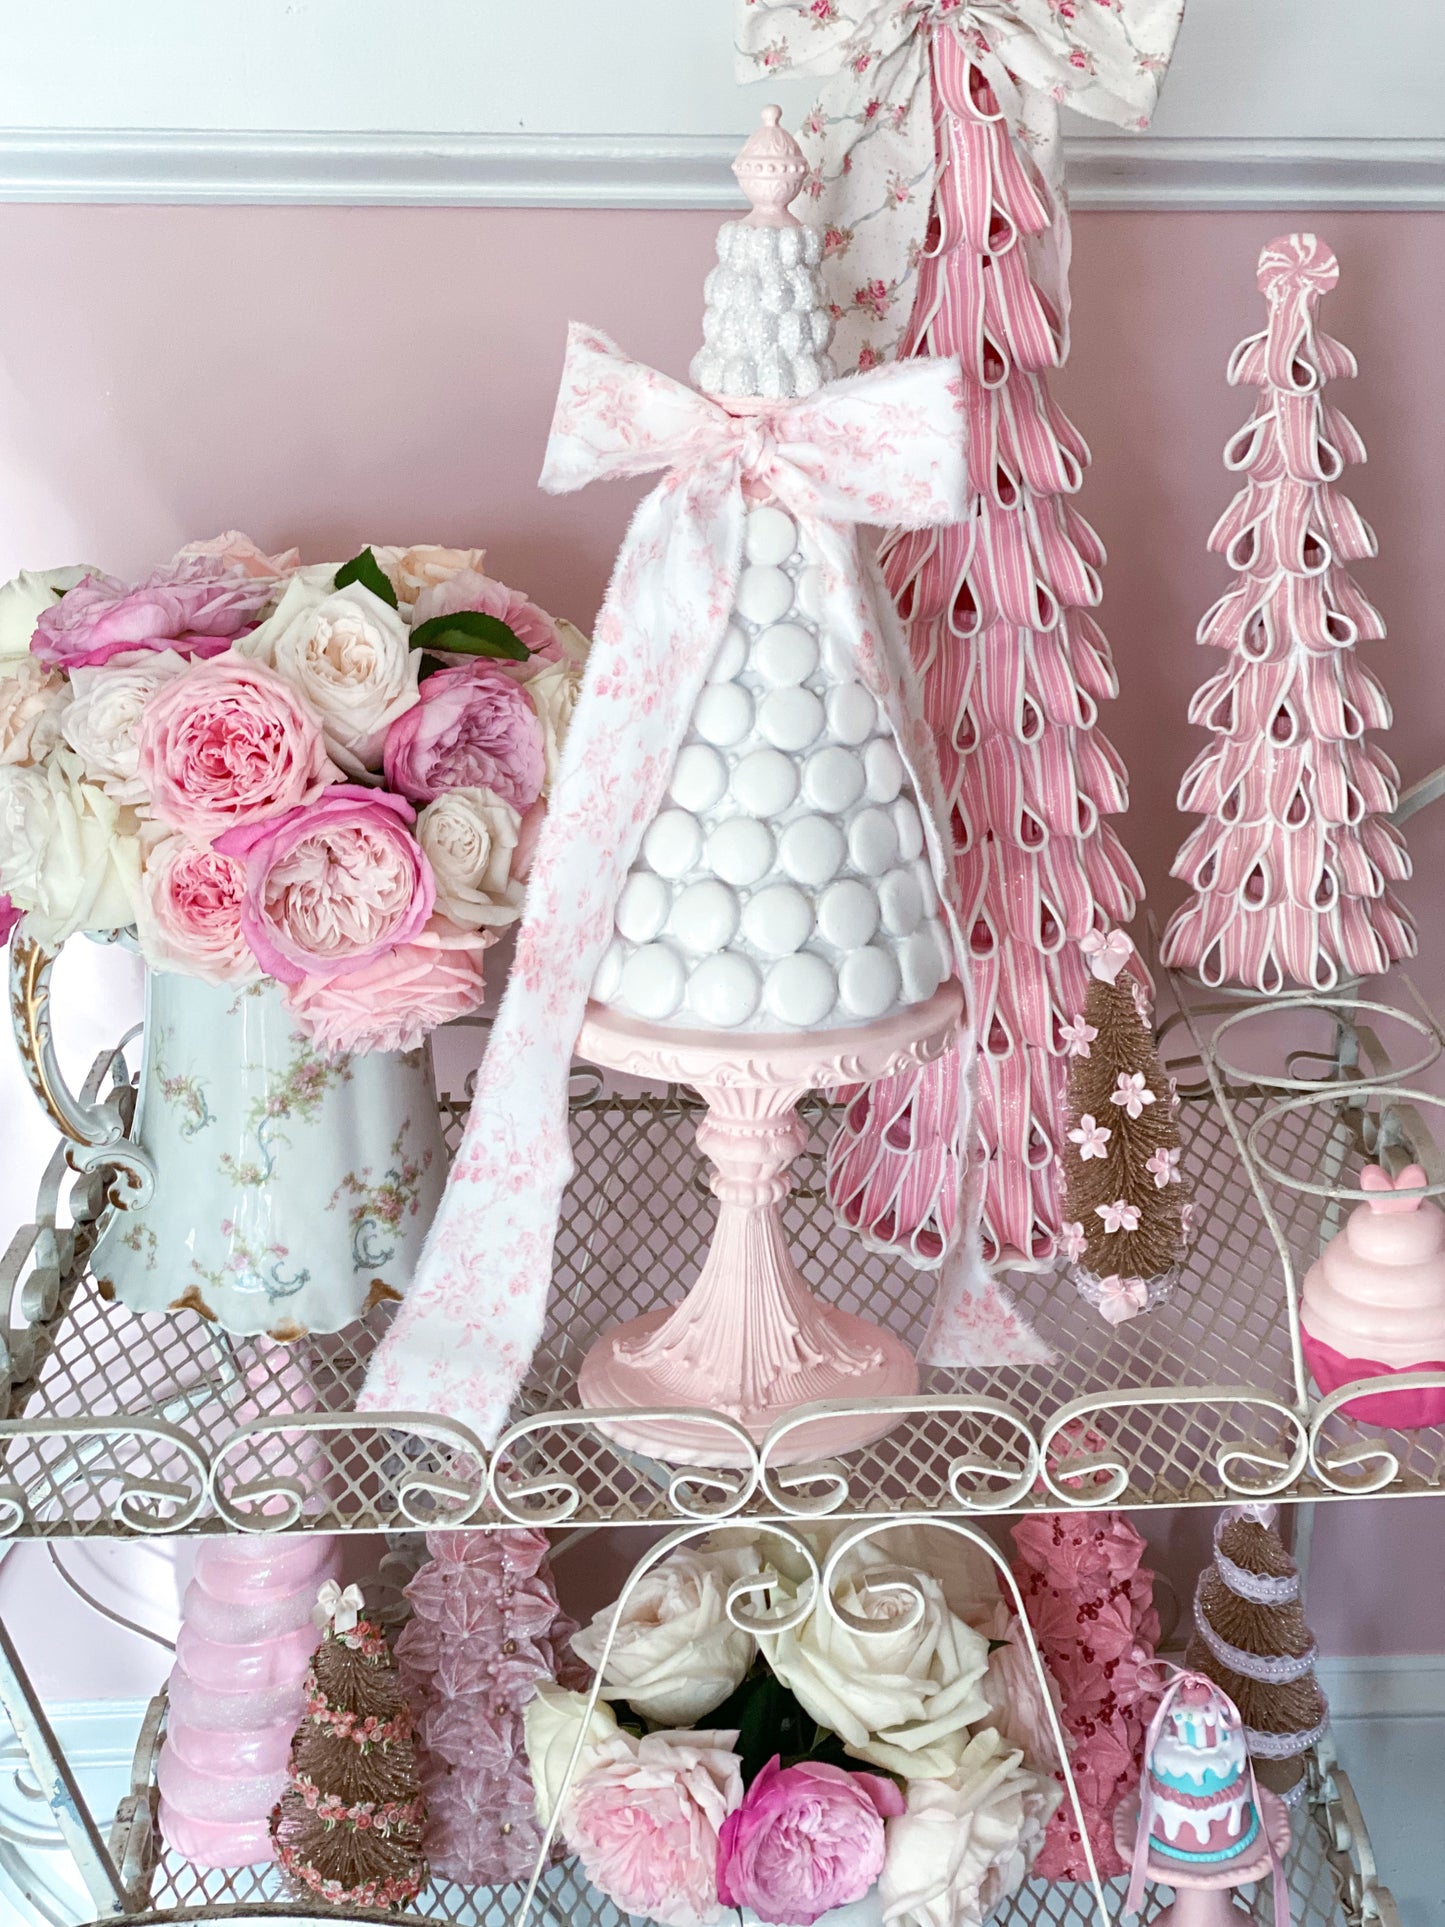 Bespoke Pink and White Coquette Macaron Tree with pink floral bow a la Marie Antoinette